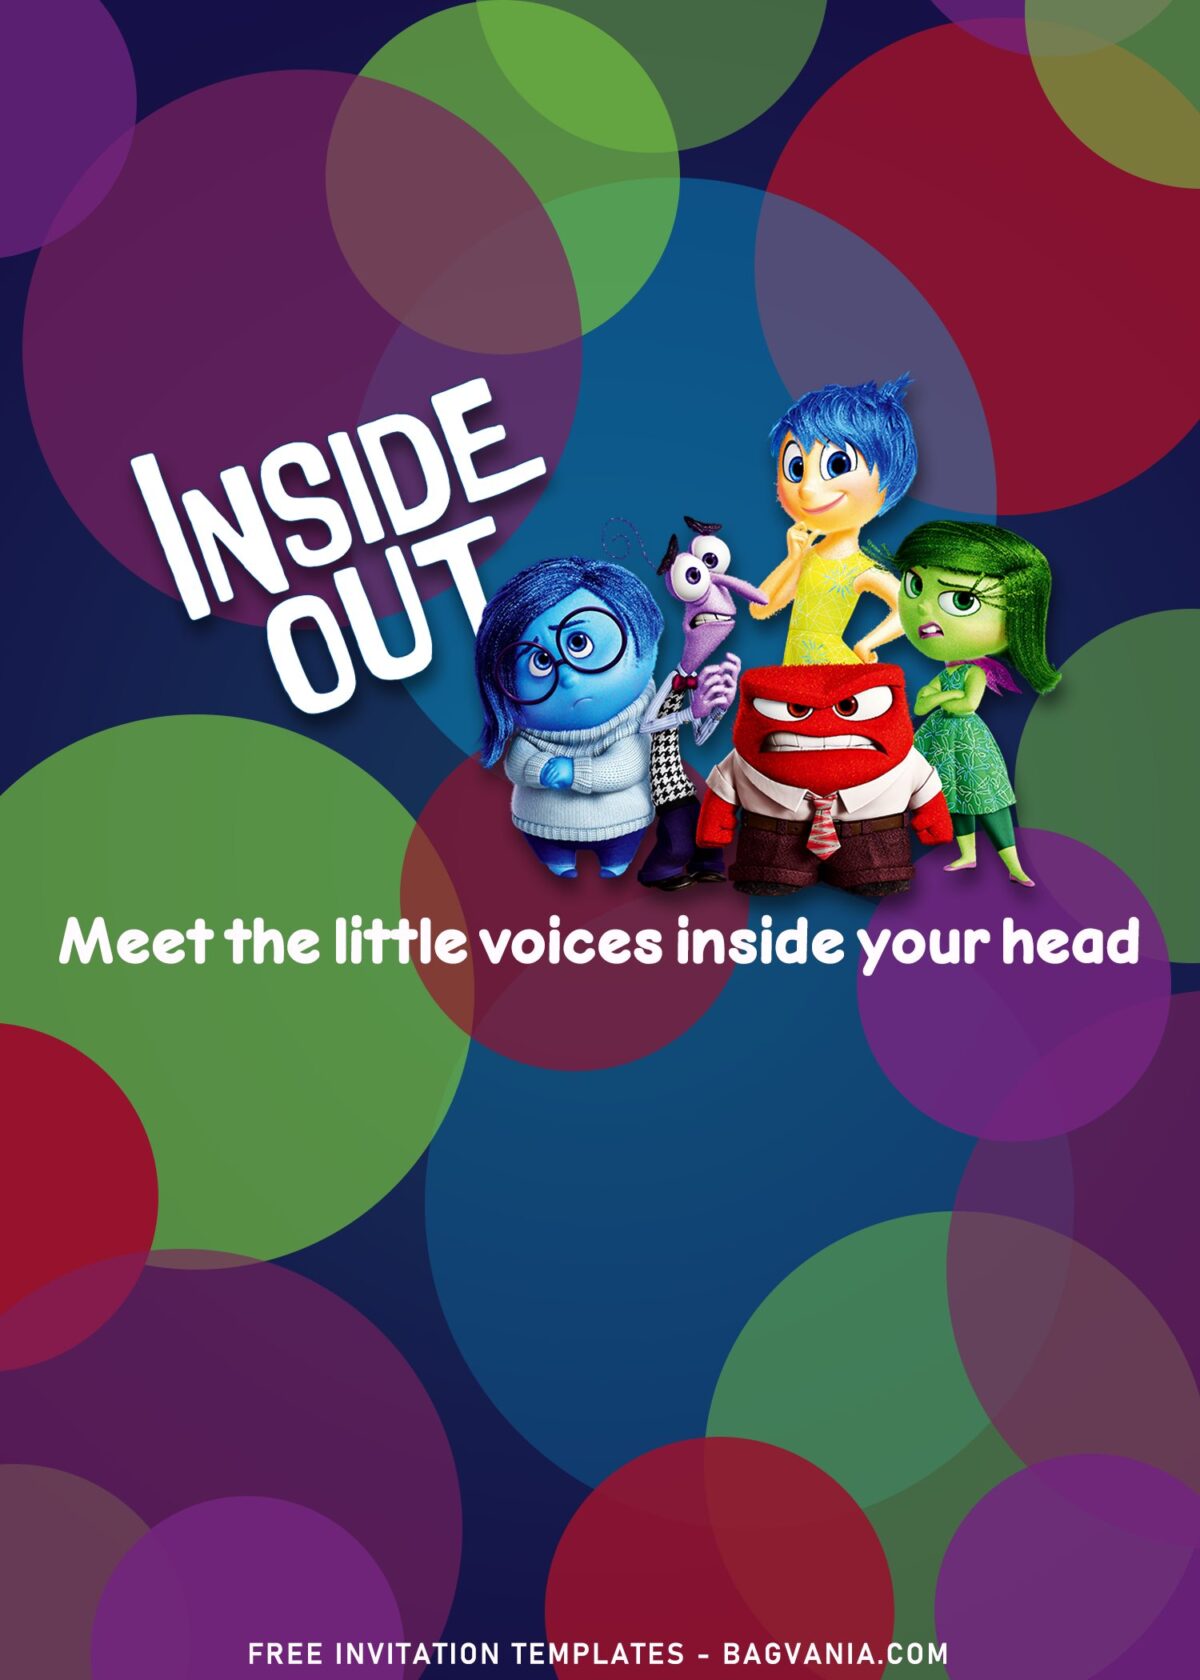 10+ Amusing Disney Inside Out Birthday Invitation Templates with Anger